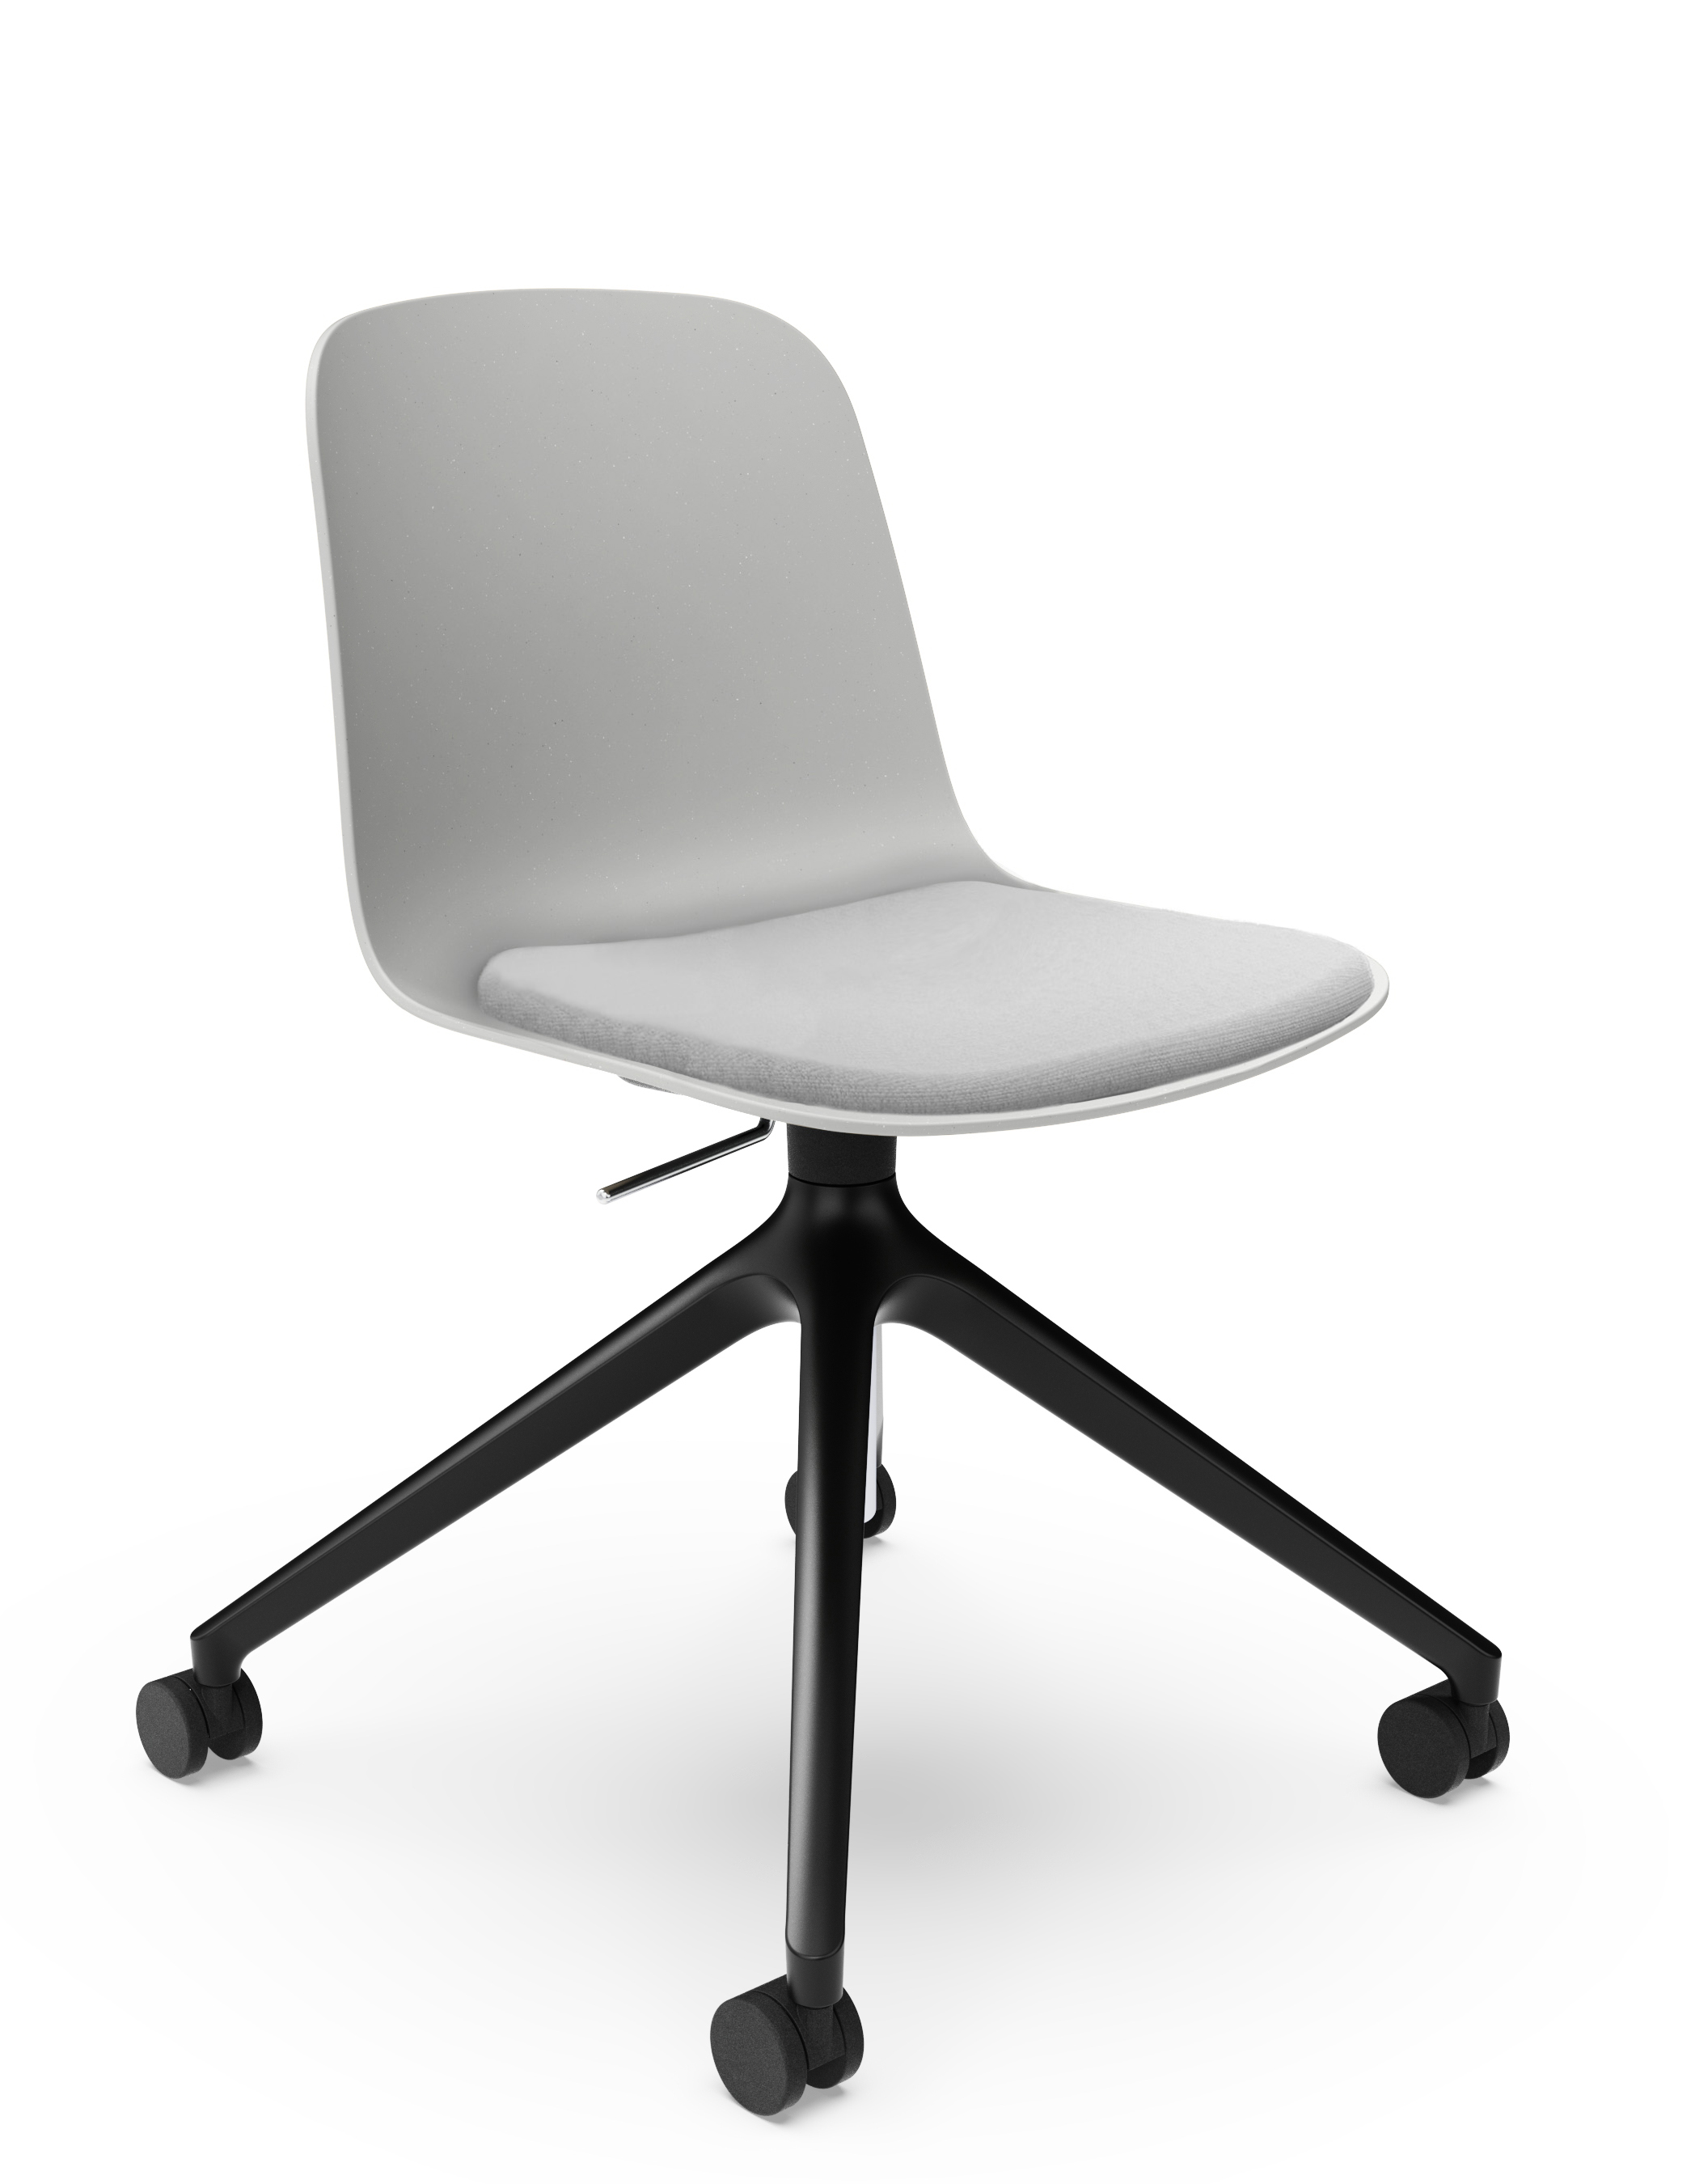 WS - Moto Seat Pad Side Chair - Black 4-star castor base, with gas lift - Chalk